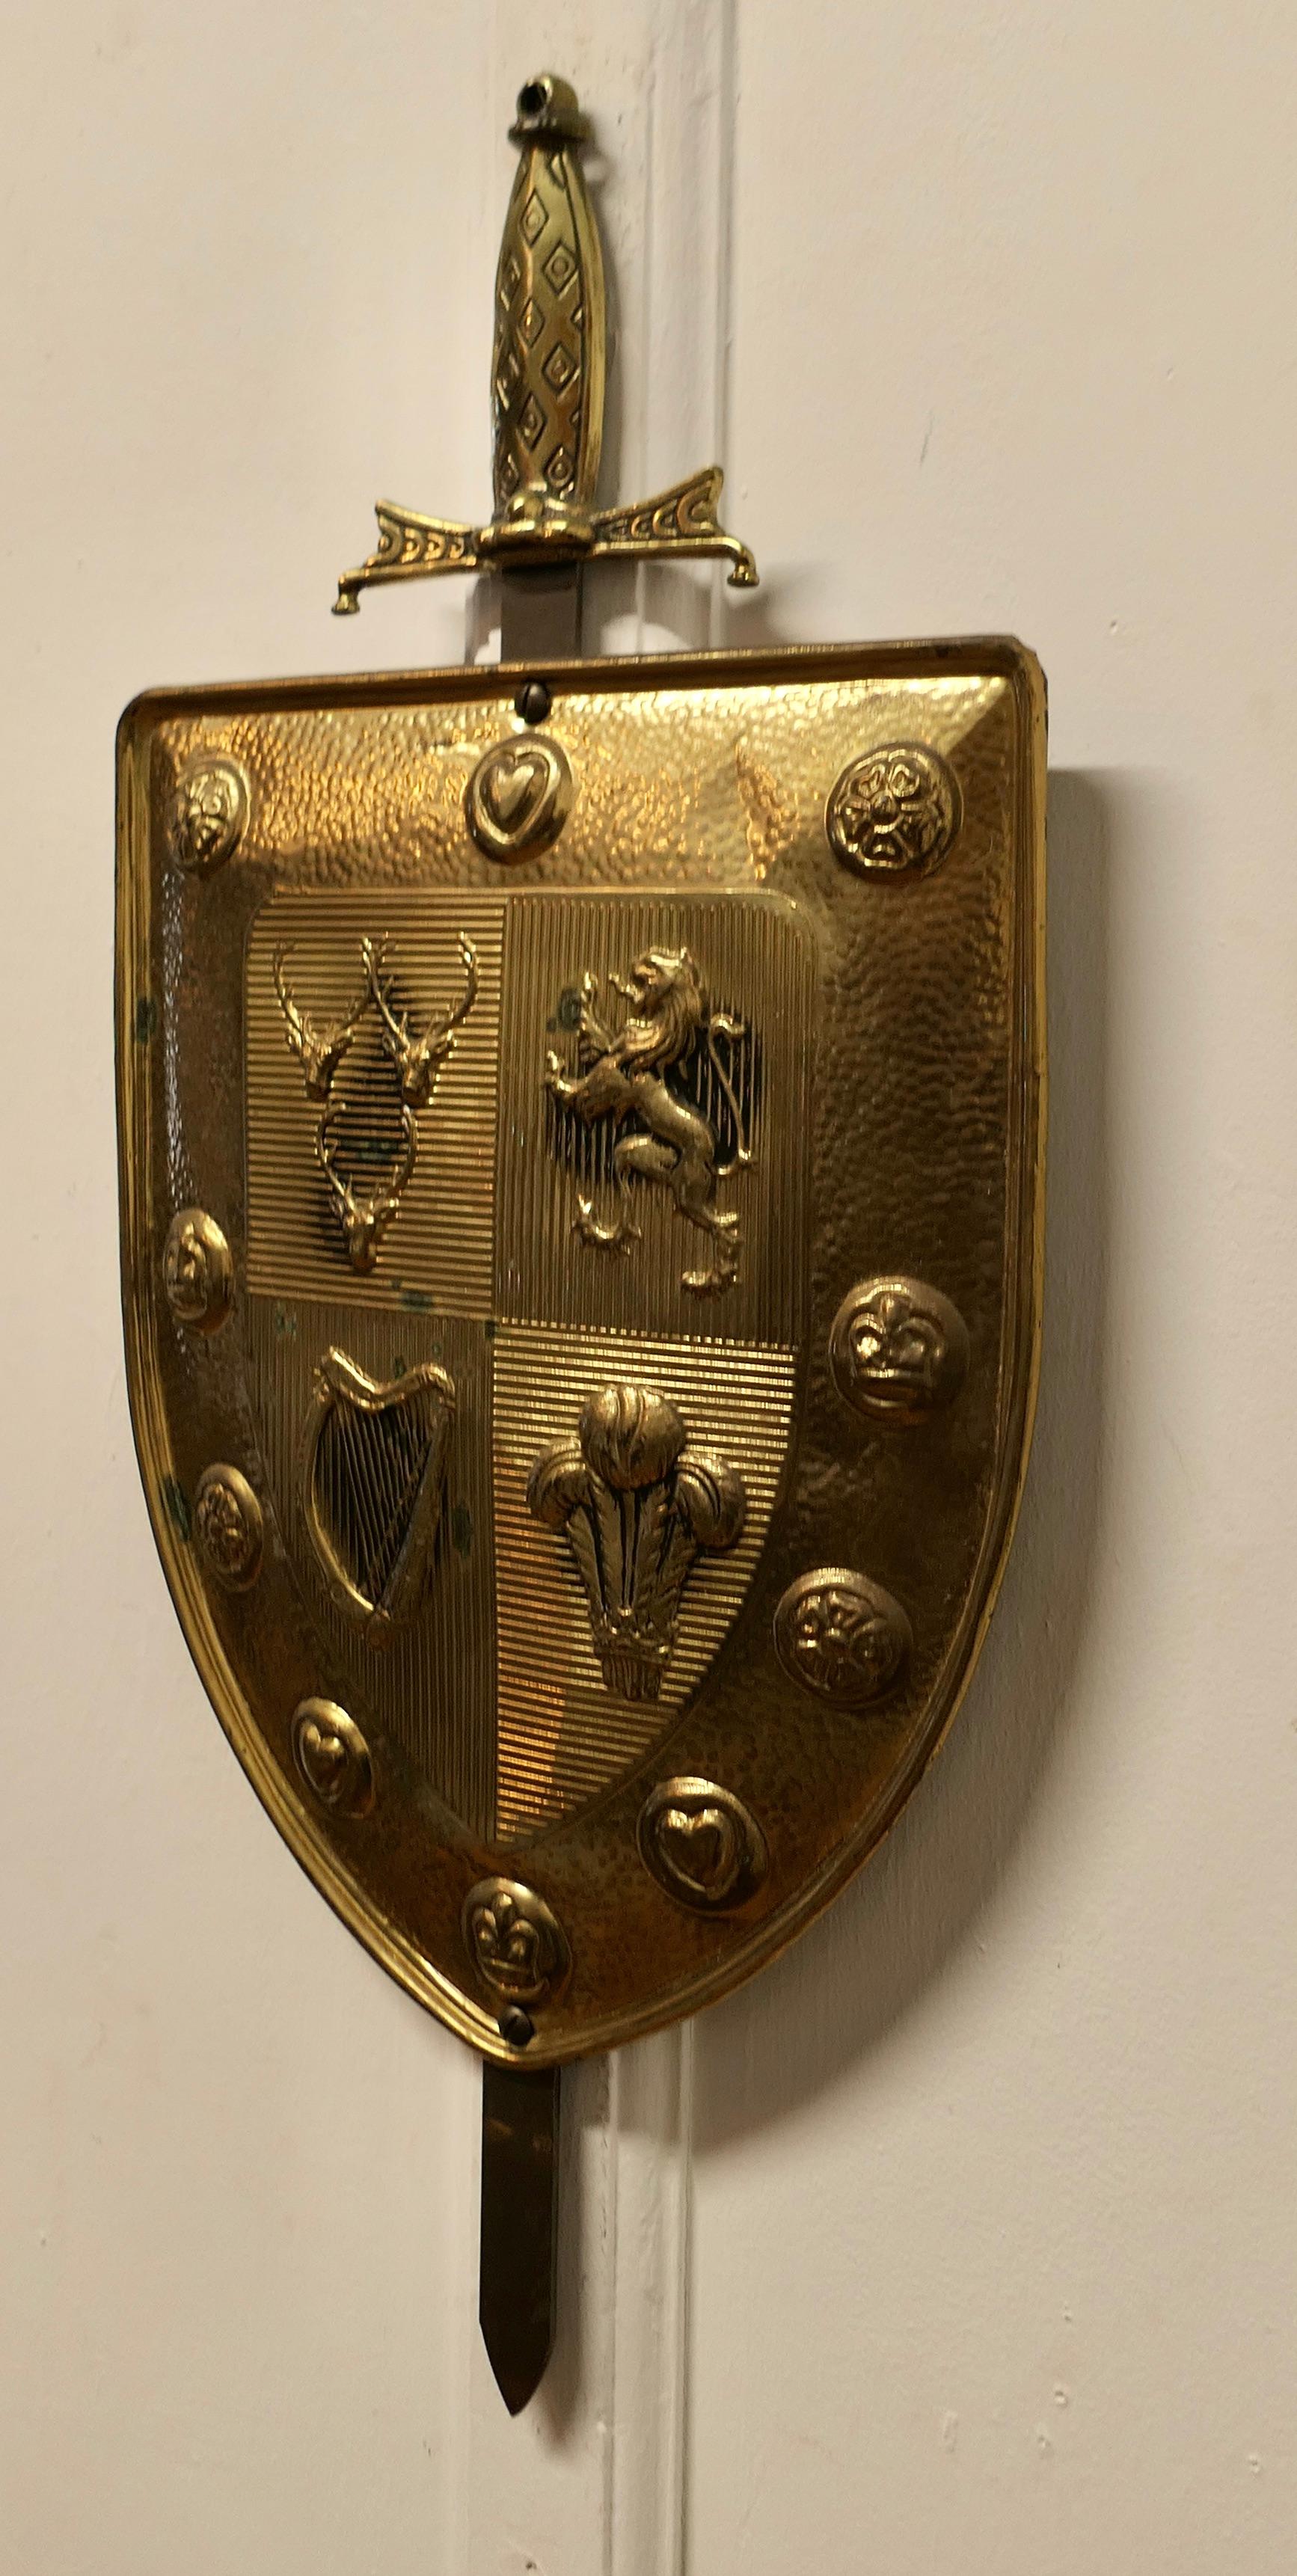  Wall Hanging Arts and Crafts Brass Shield with Sword   In Good Condition For Sale In Chillerton, Isle of Wight